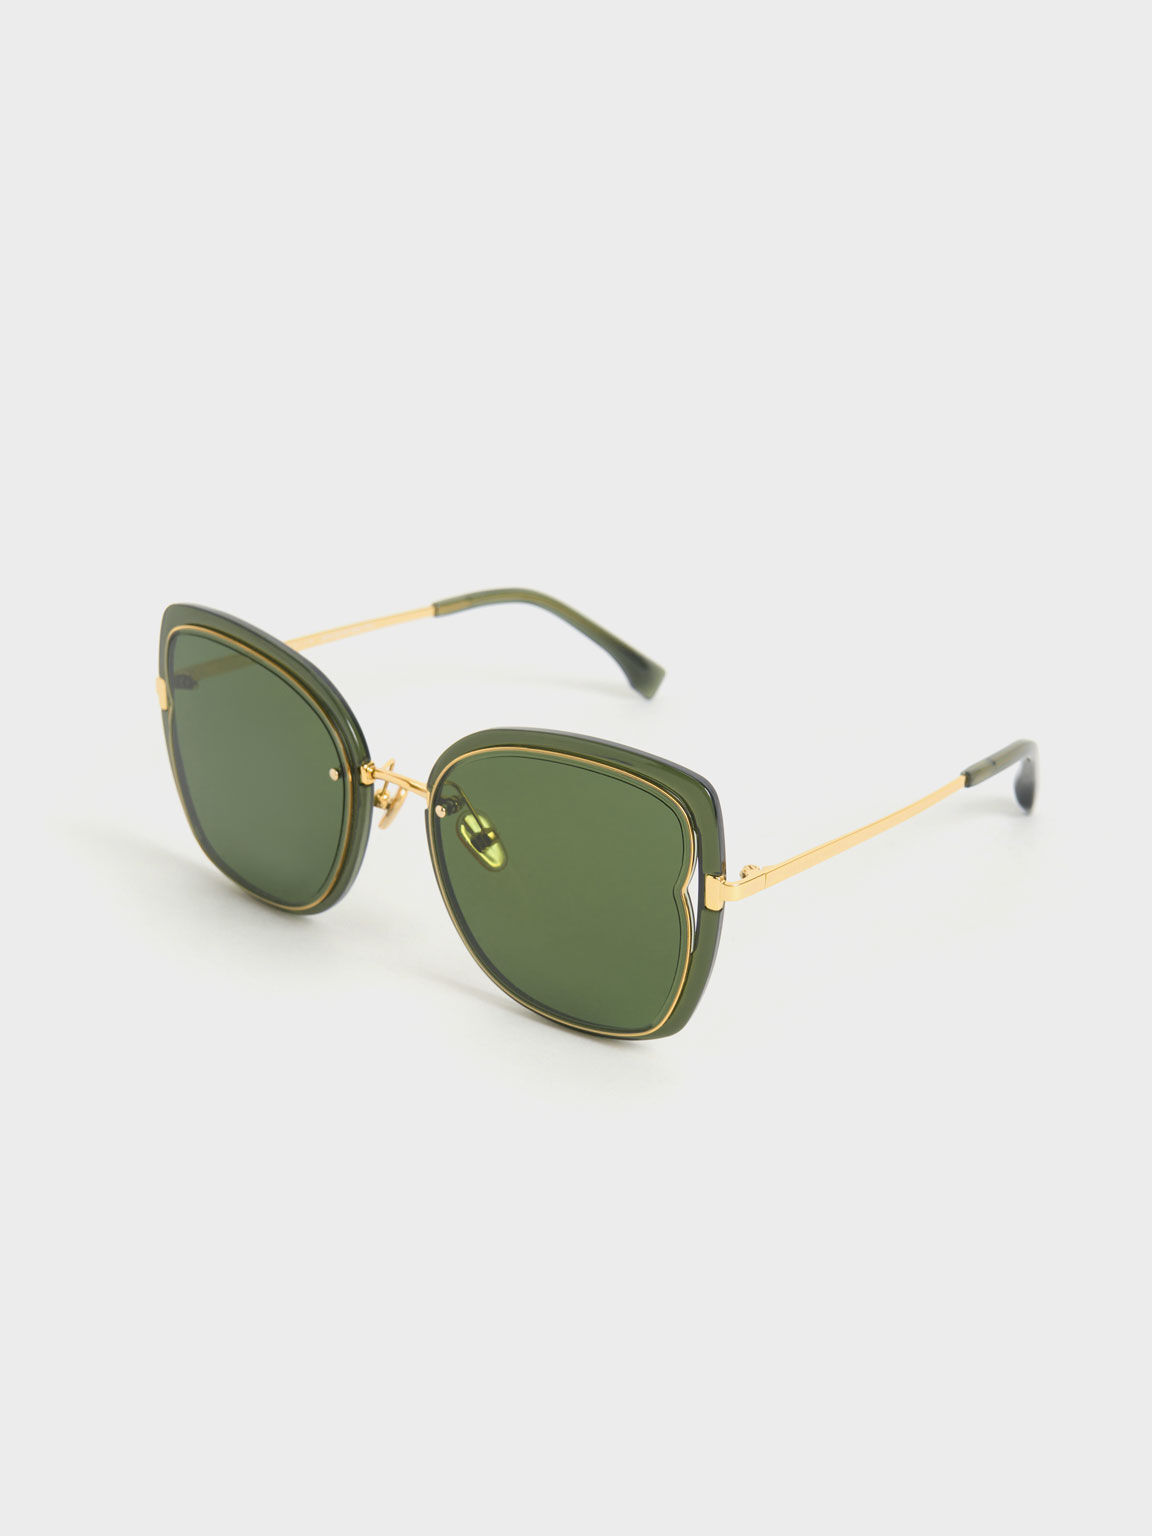 Wire-Frame Butterfly Sunglasses, Green, hi-res